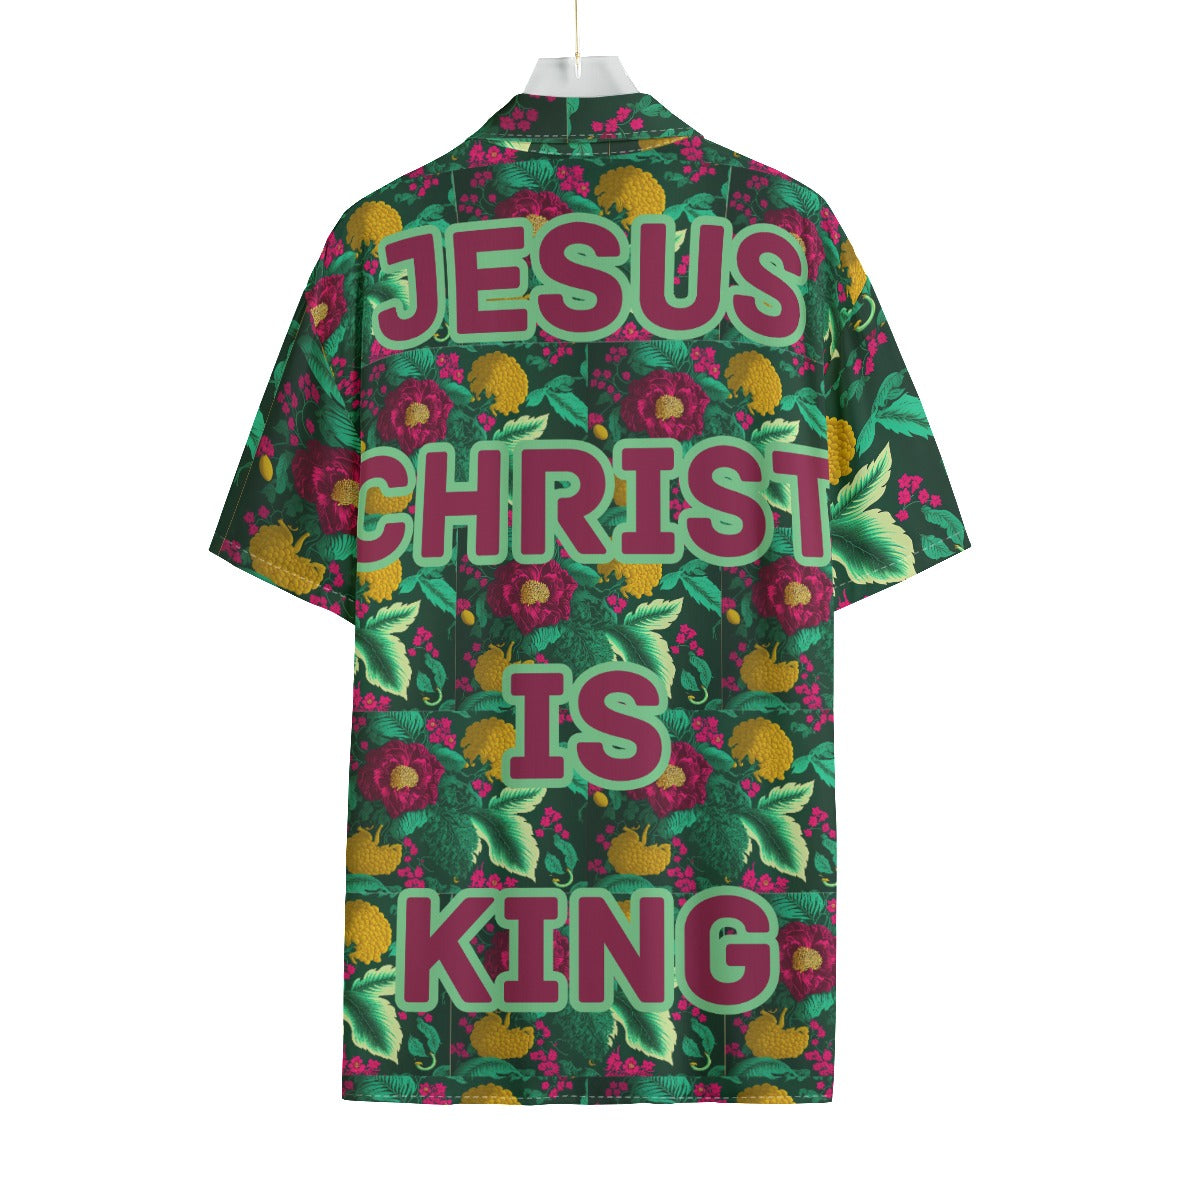 Jesus Christ is King Men's Rayon Shirt With Pocket